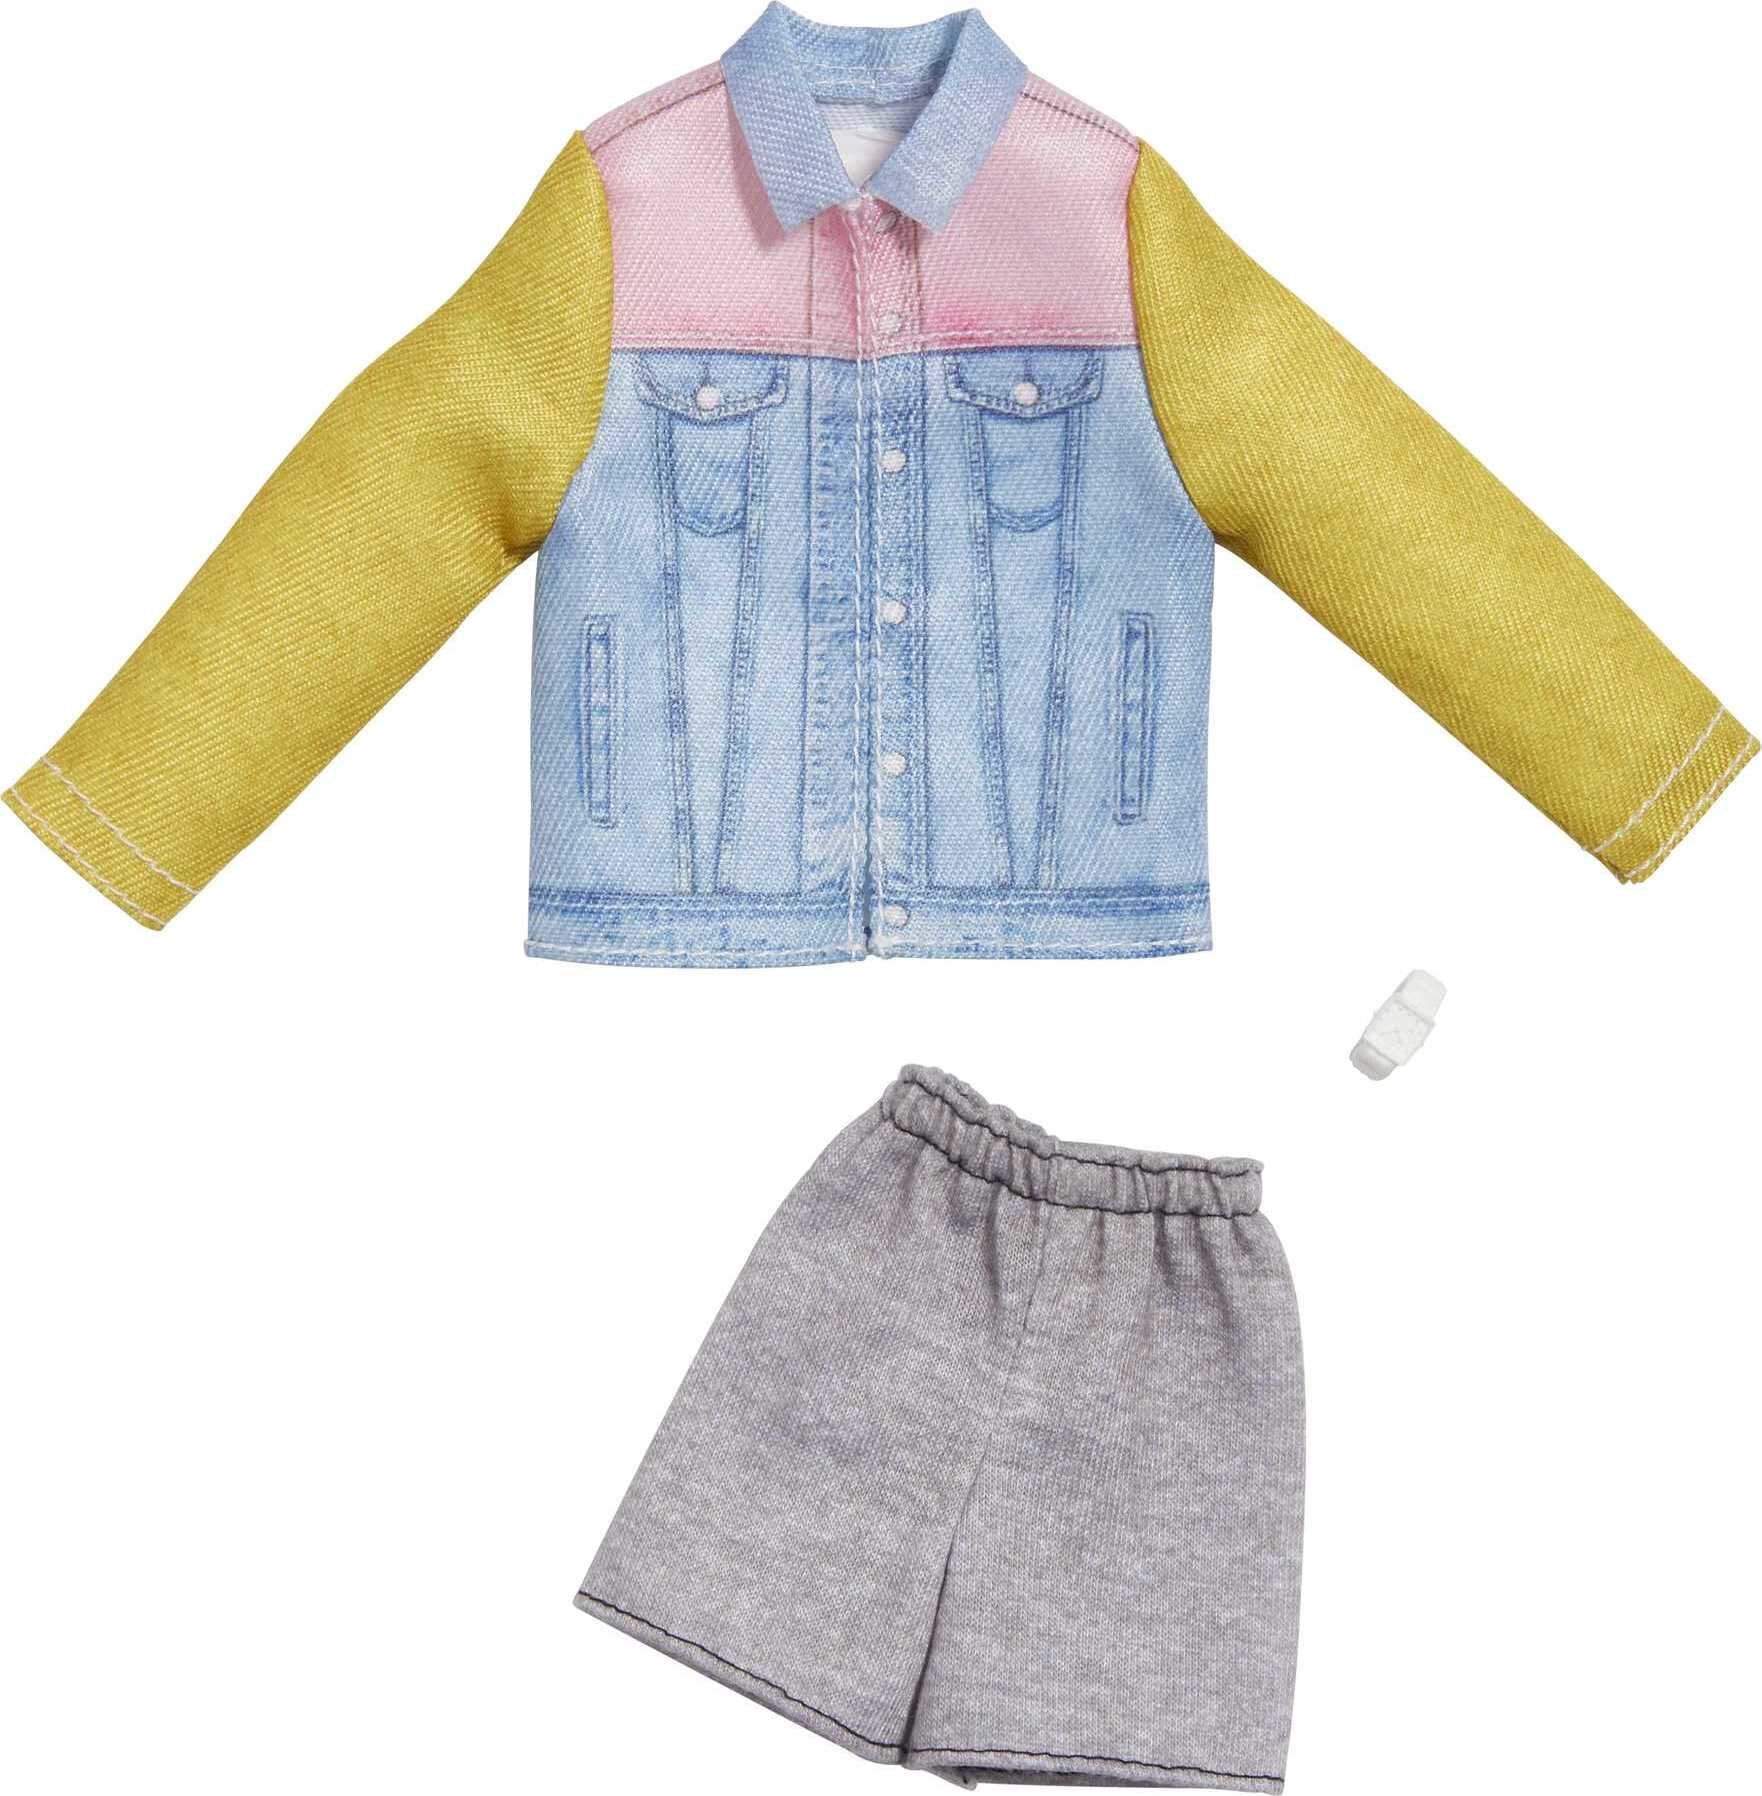 Barbie Fashions Ken Doll Clothes, Set with Denim Jacket, Shorts & Accessory (1 Outfit)